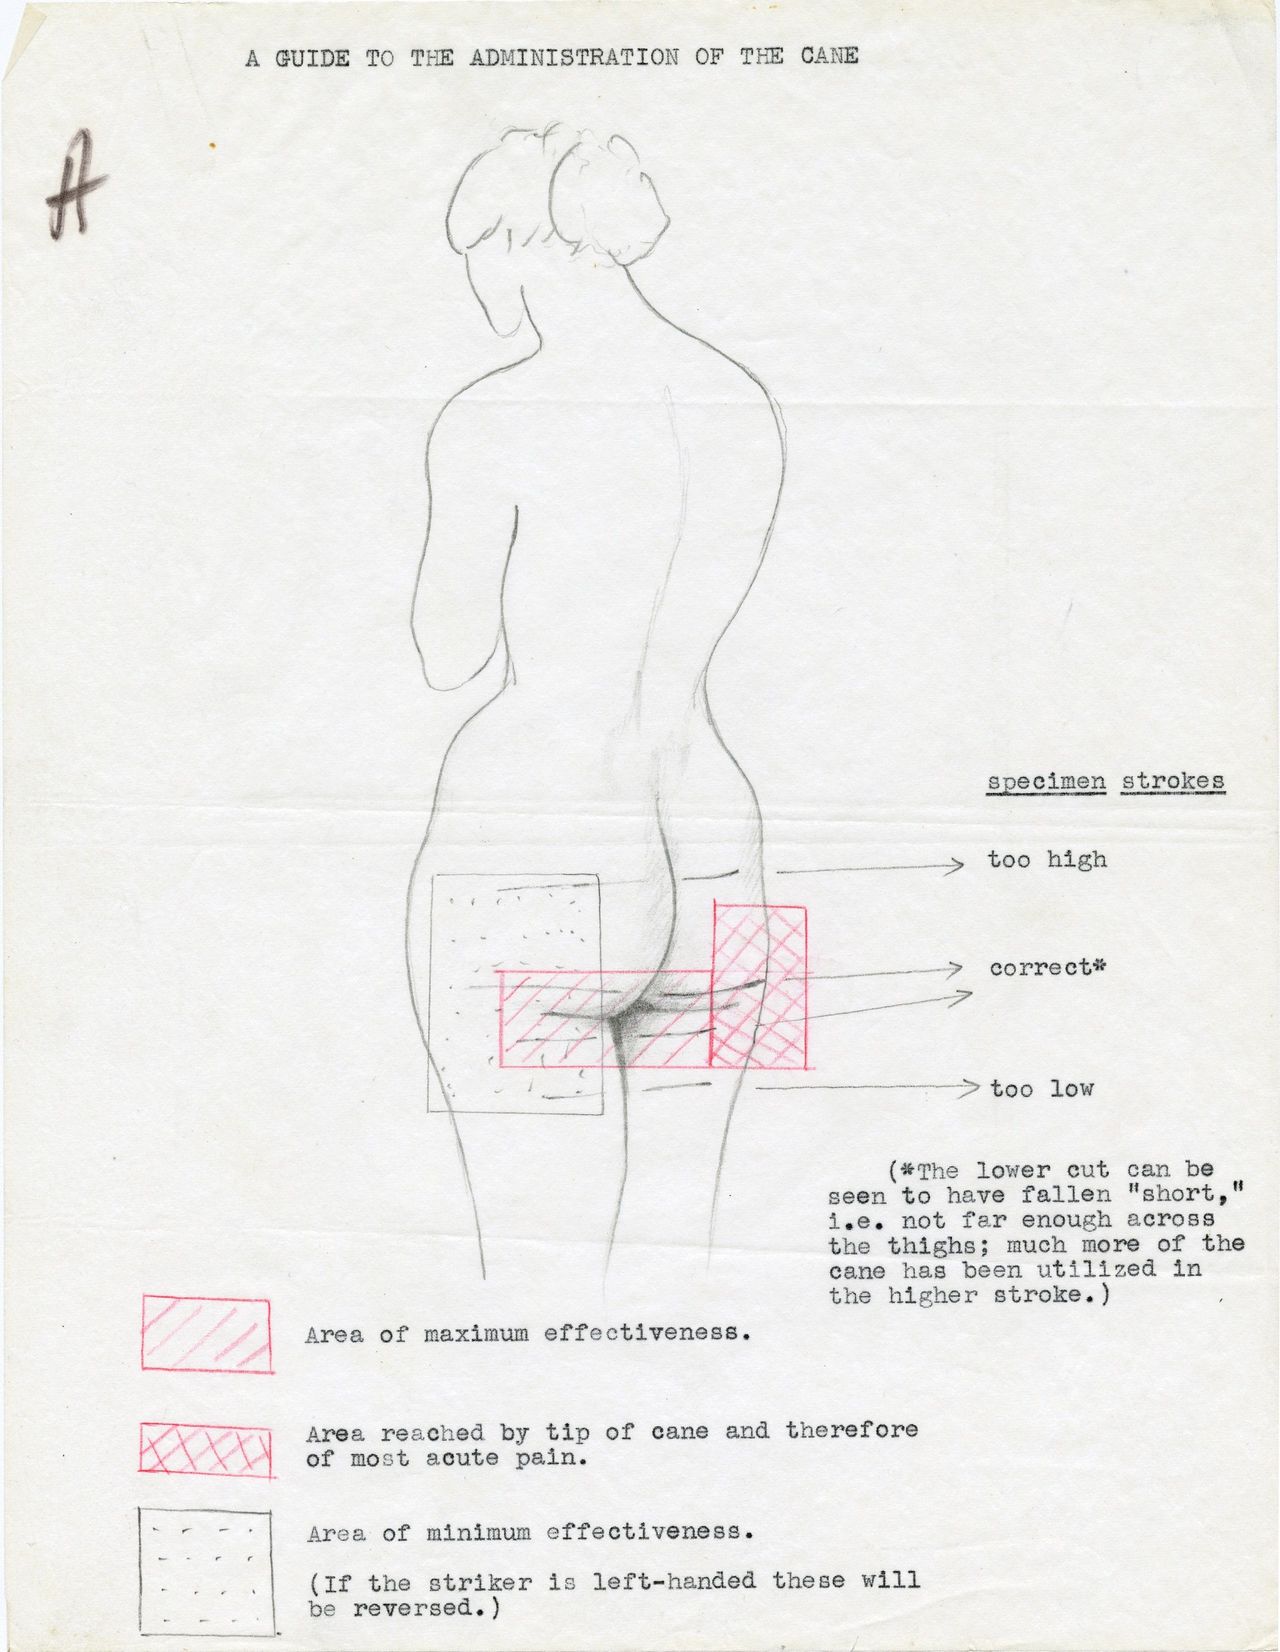 Anonymous, "A Guide to the Administration of the Cane," 20th century, graphite and colored pencil on paper.